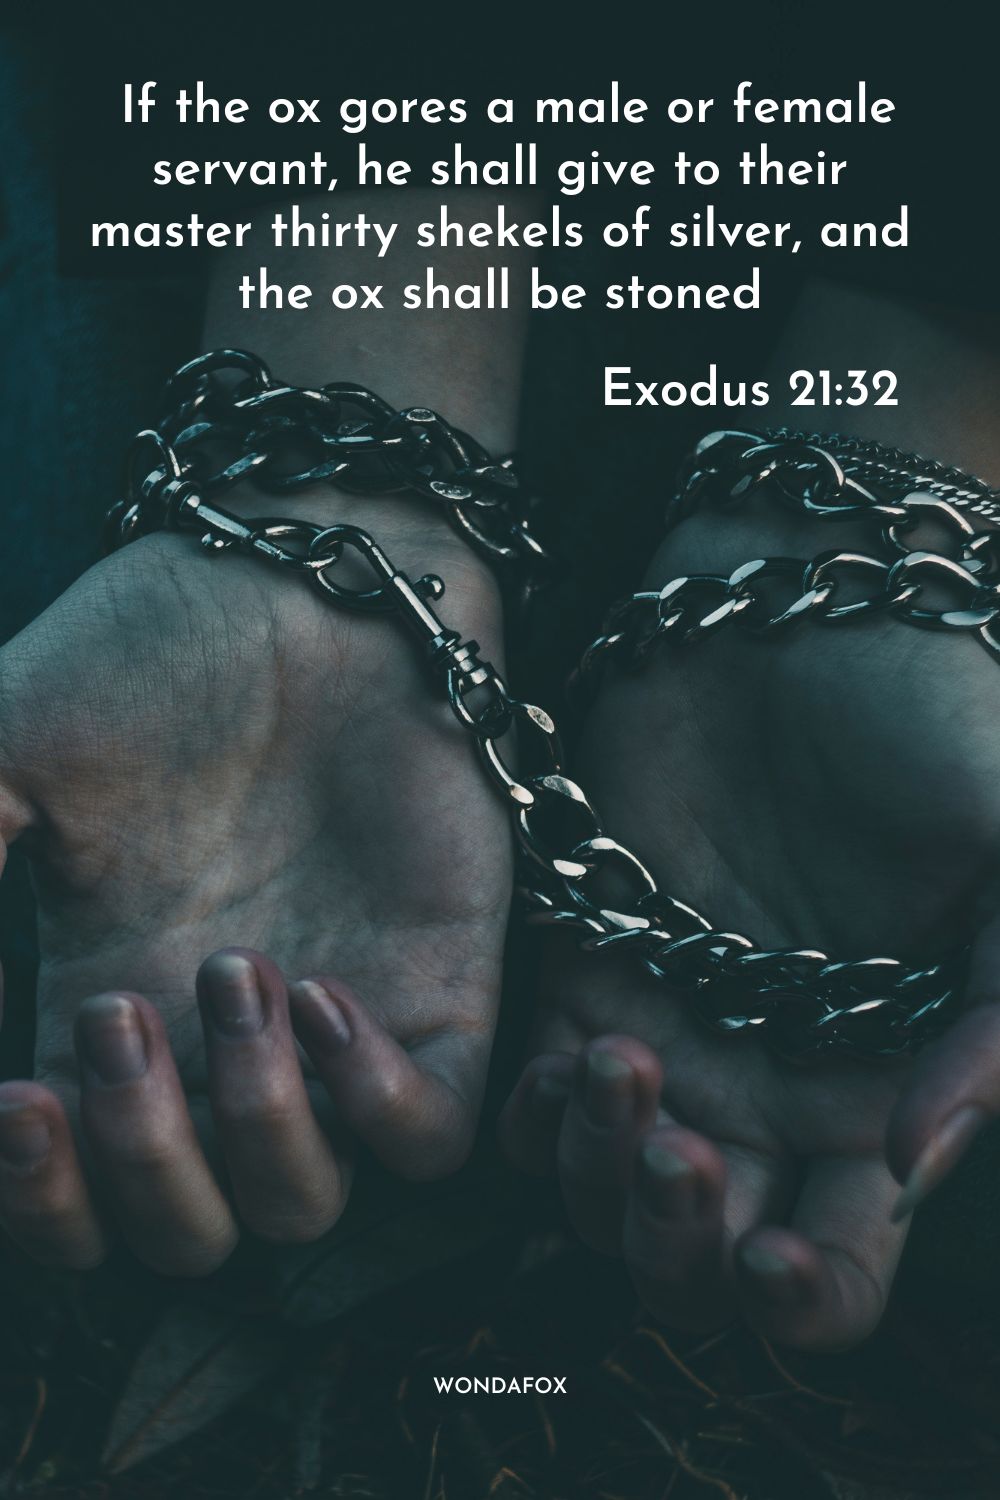  If the ox gores a male or female servant, he shall give to their master thirty shekels of silver, and the ox shall be stoned.
Exodus 21:32